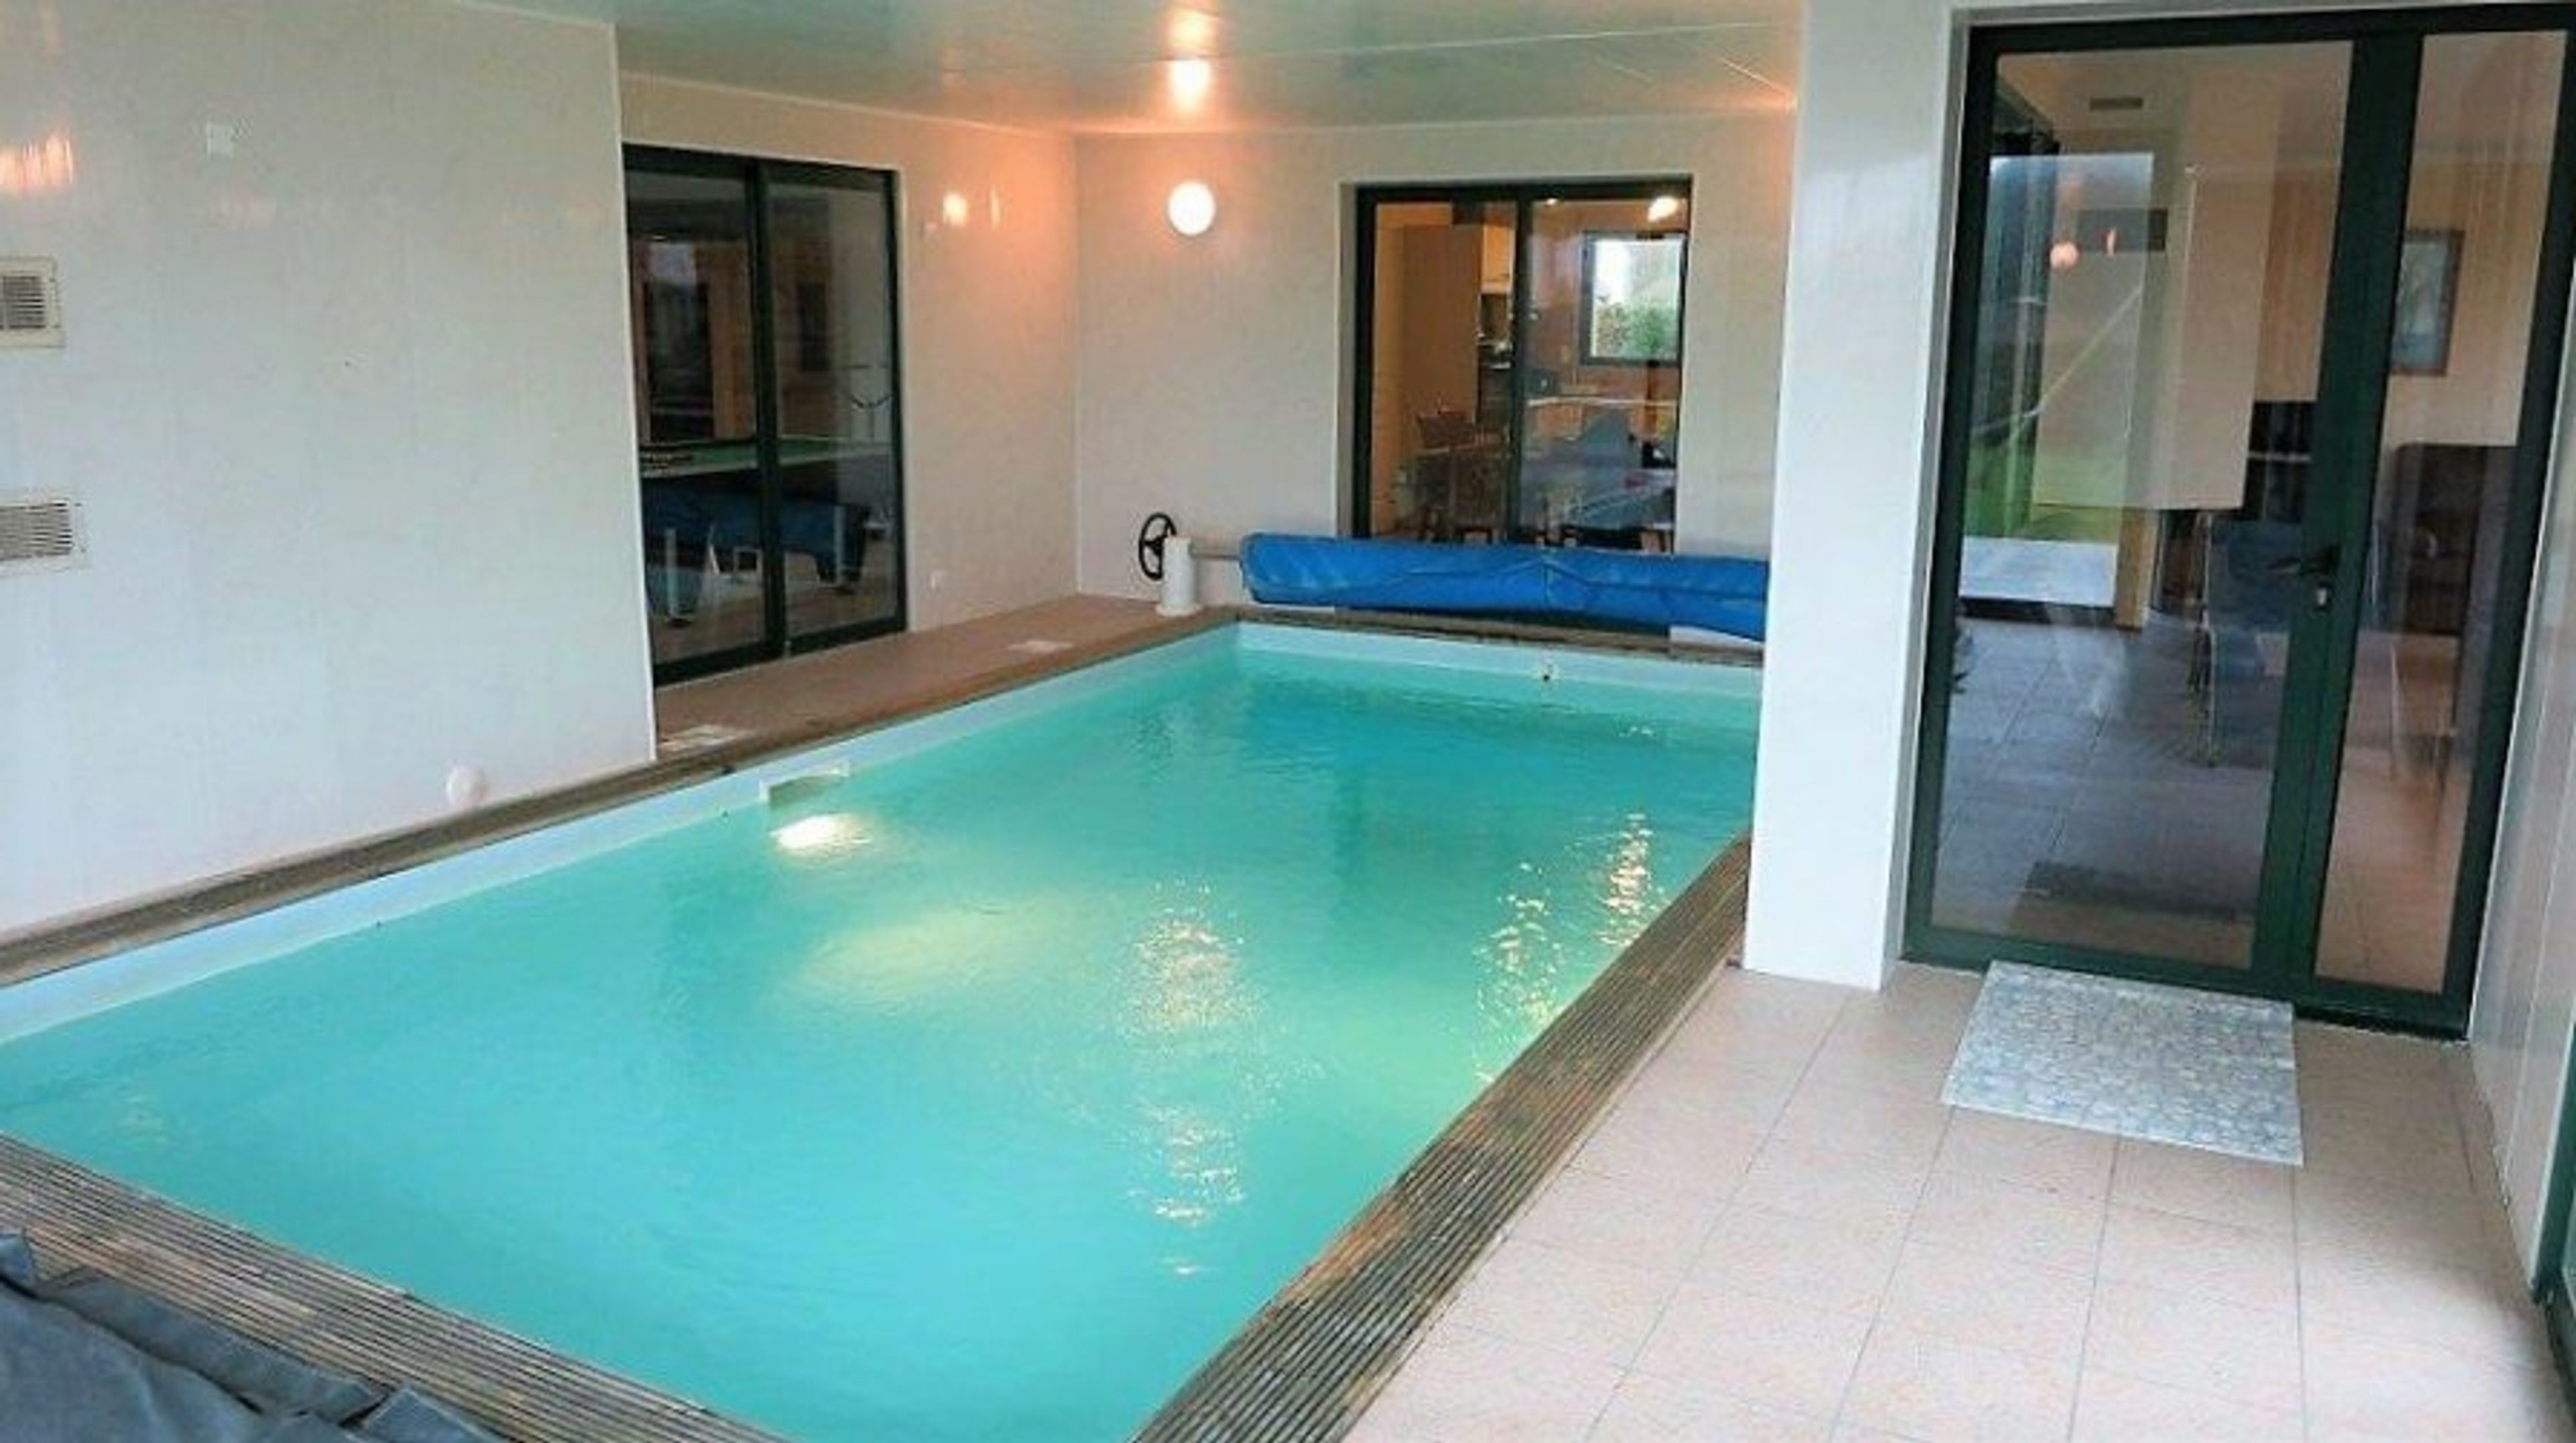 Private indoor heated pool. Heated (28°c). Counter current swimming.